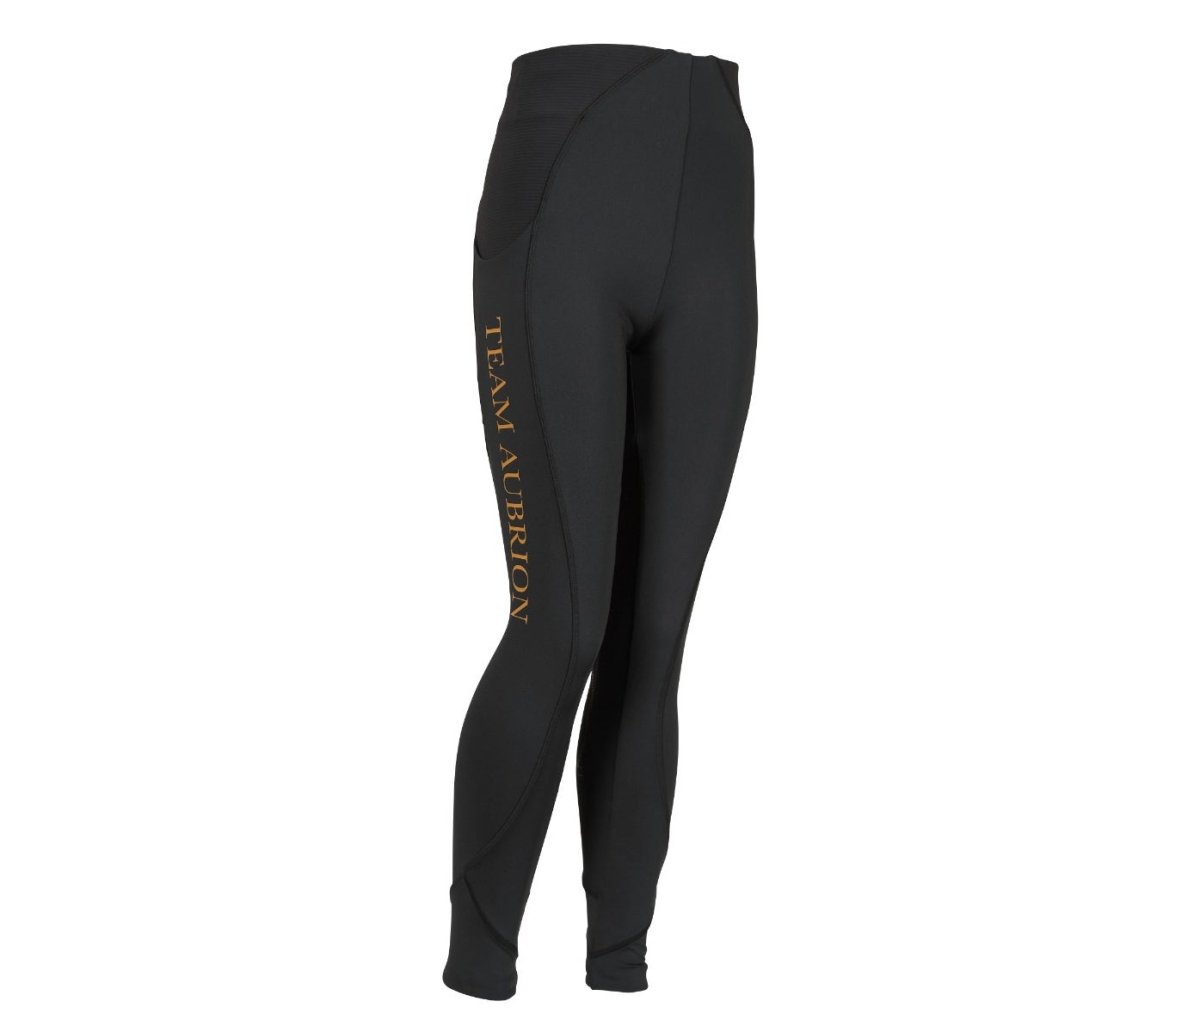 Aubrion SS24 Team Riding Tights - Young Rider - Black - 11/12 Years